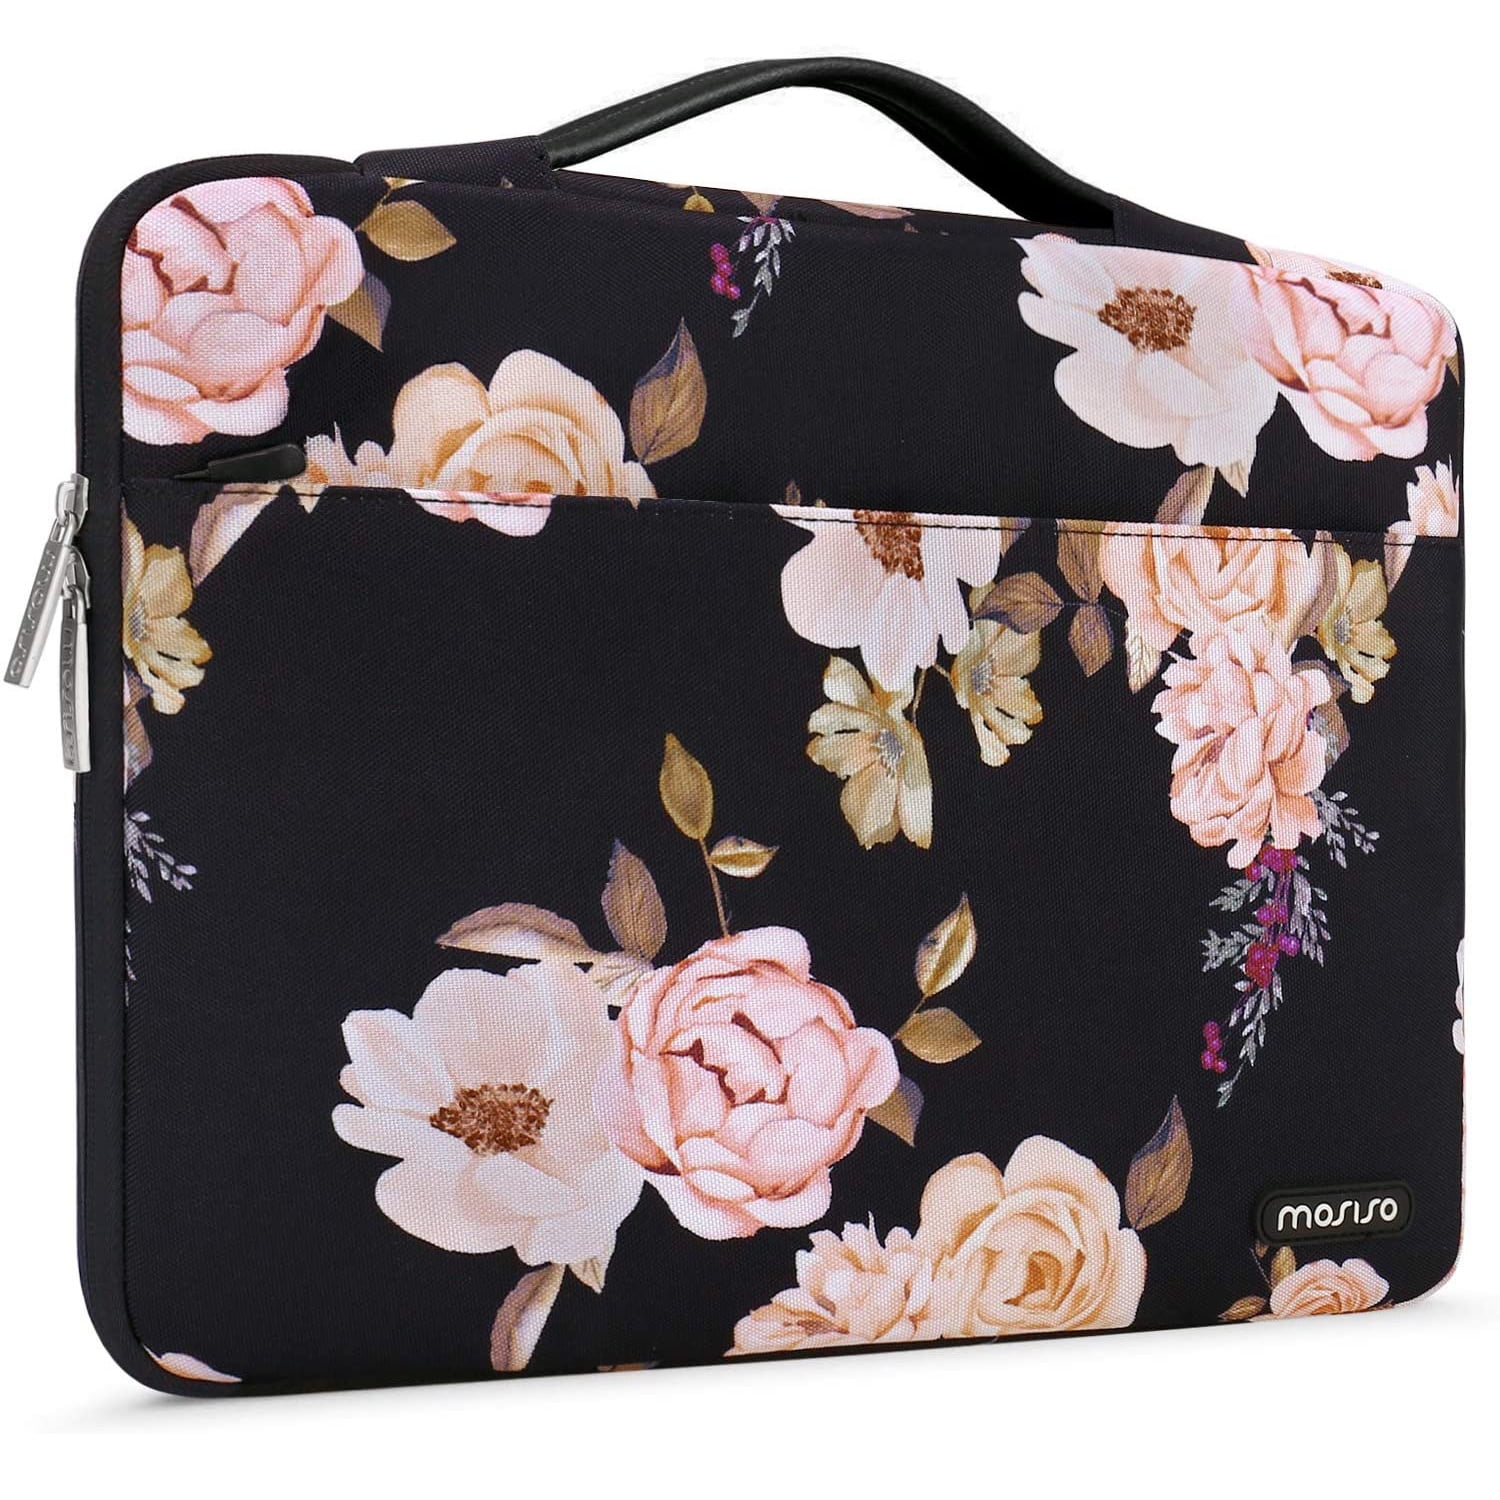 Laptop Sleeve Water Repellent Neoprene Bag Protective Case Cover Compatible with MacBook Pro/Asus/Dell/Hp/Sony/Acer 12 Inch Roses Floral Lavender Purple Pattern 